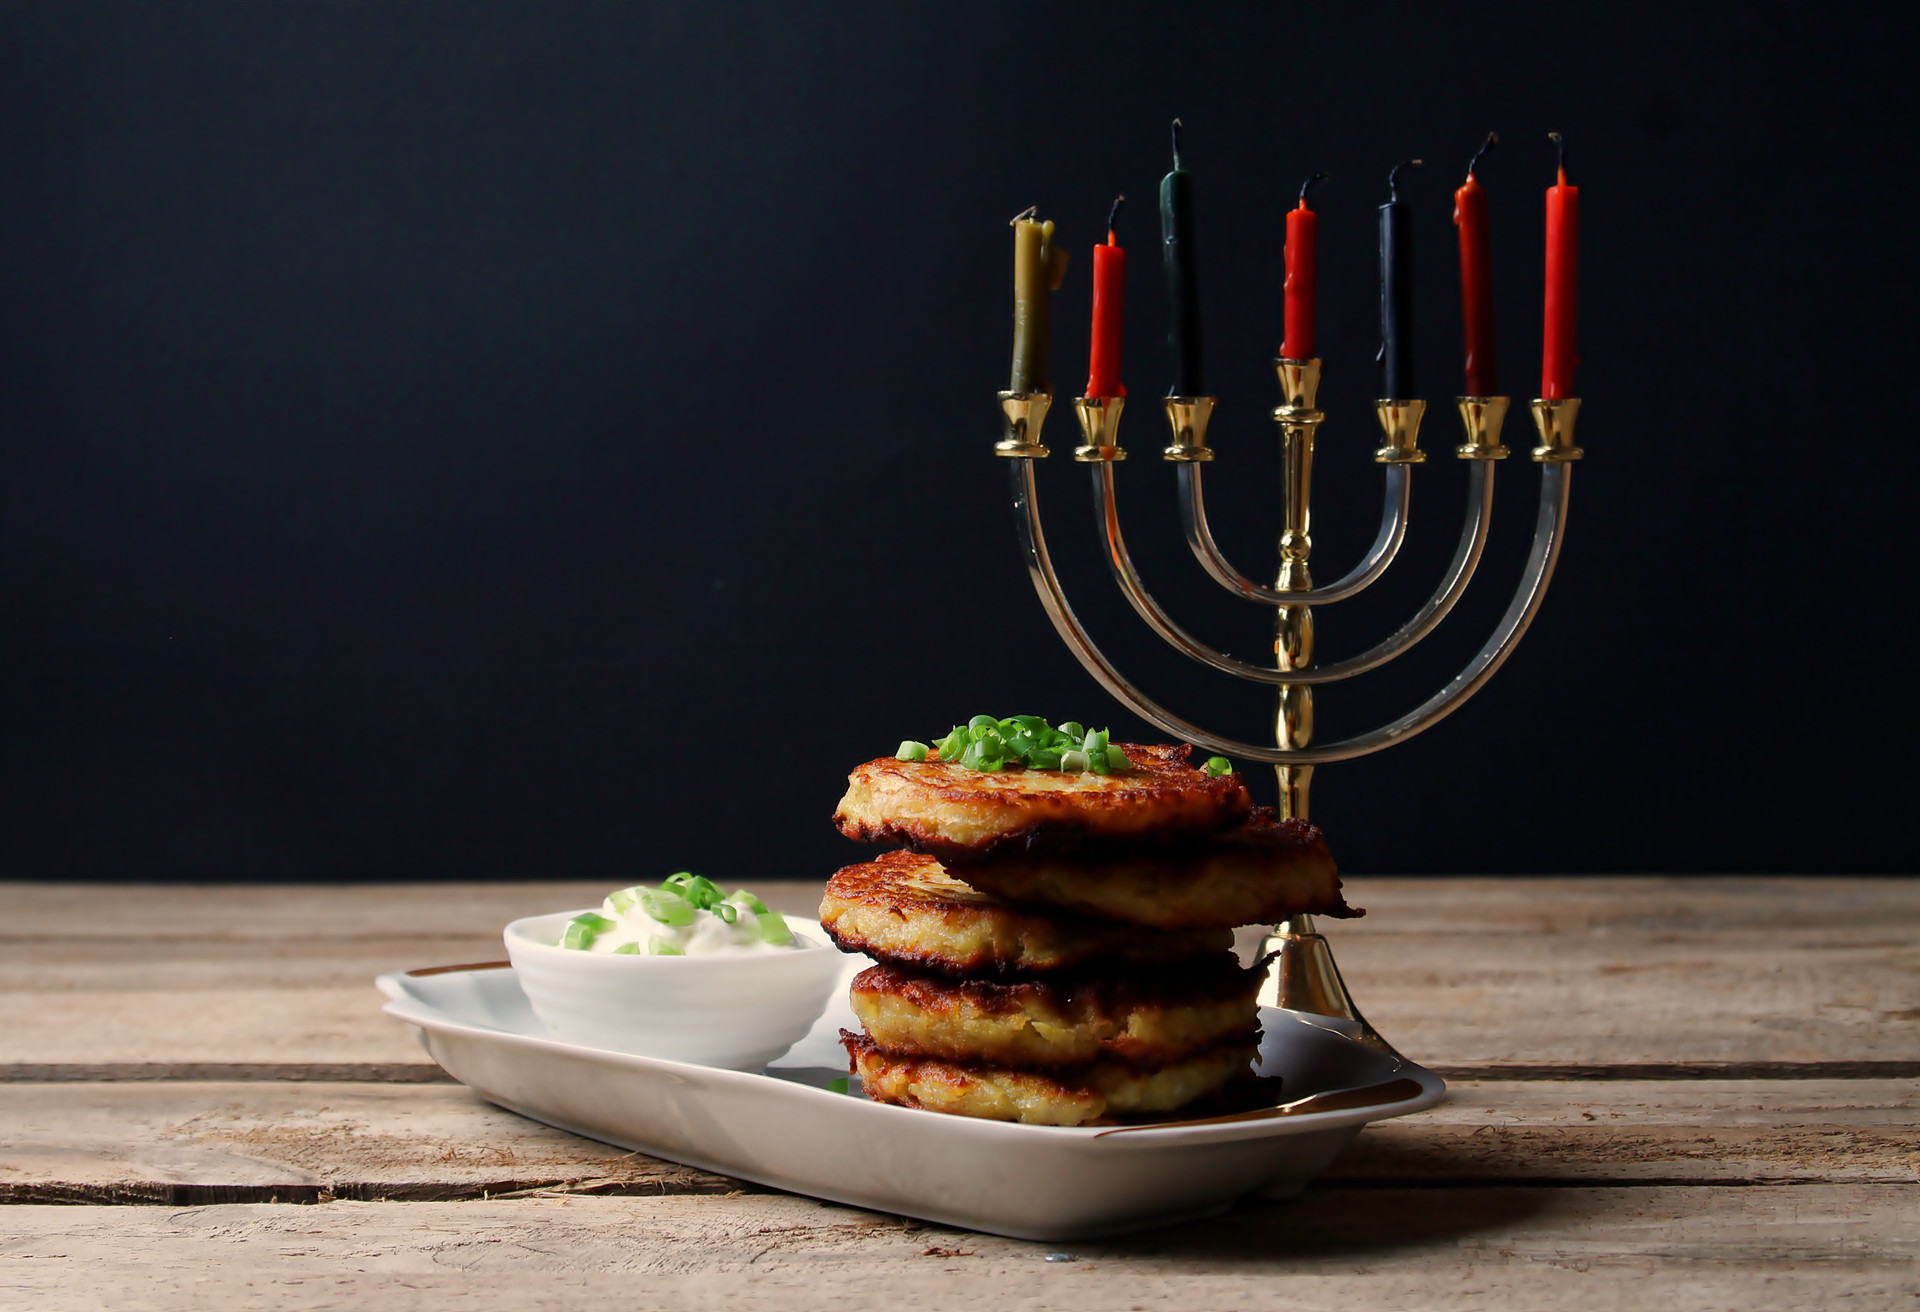 Traditional Hanukkah Jewish Cuisine. Latkes With Sour Cream And Menorah On Wooden Table And Black Background. Side View, Copy Space.; Shutterstock ID 1544546174; Purpose: Virtual Christmas Guides; Brand (KAYAK, Momondo, Any): Kayak; Client/Licensee: KAYAK